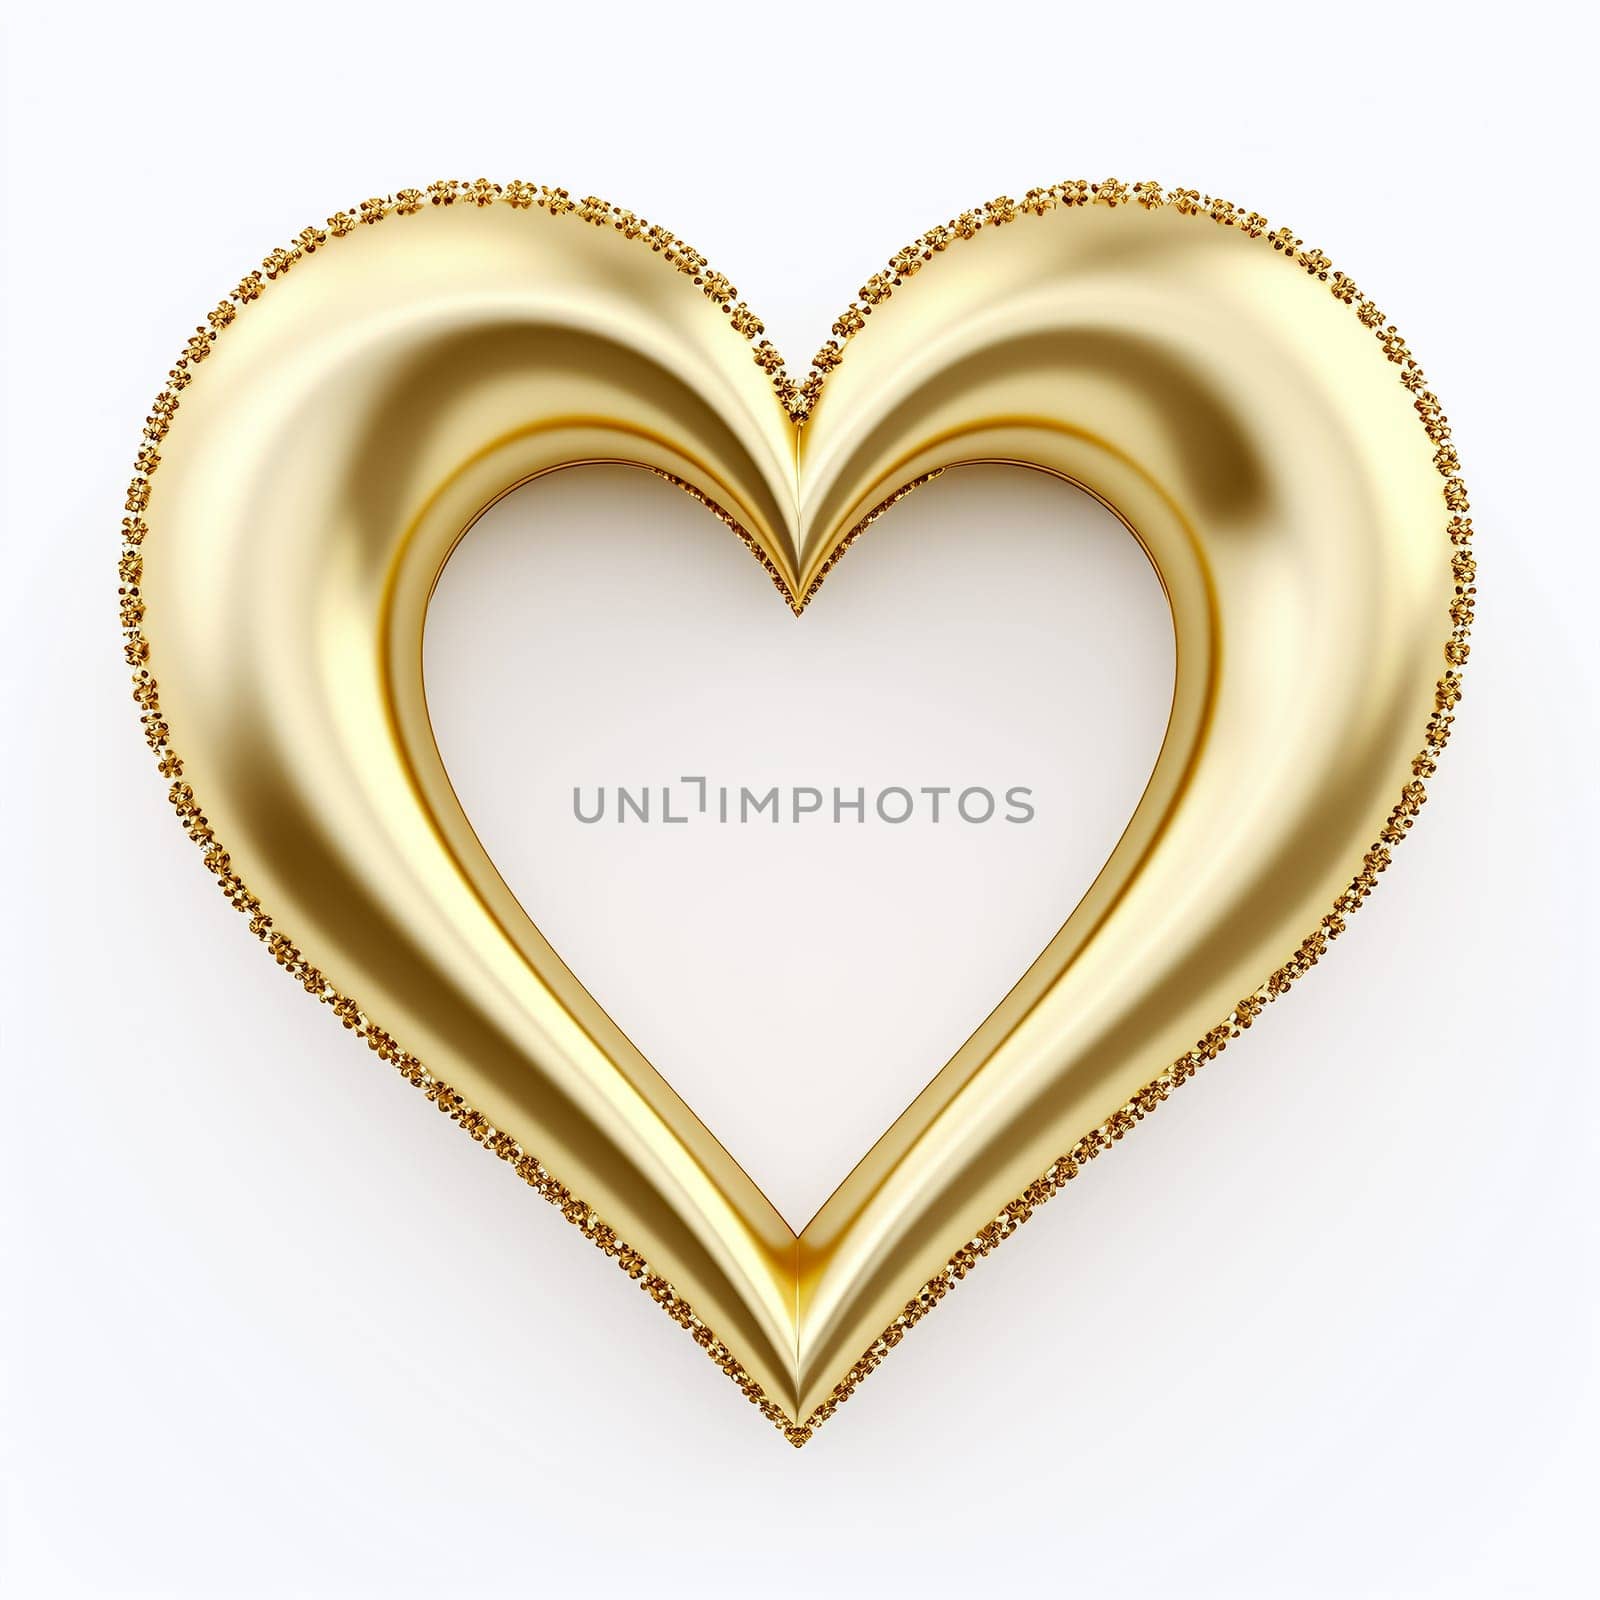 This image showcases a polished golden heart with glittering edges, set against a clean white backdrop, symbolizing elegance, affection, and valentine's day concept